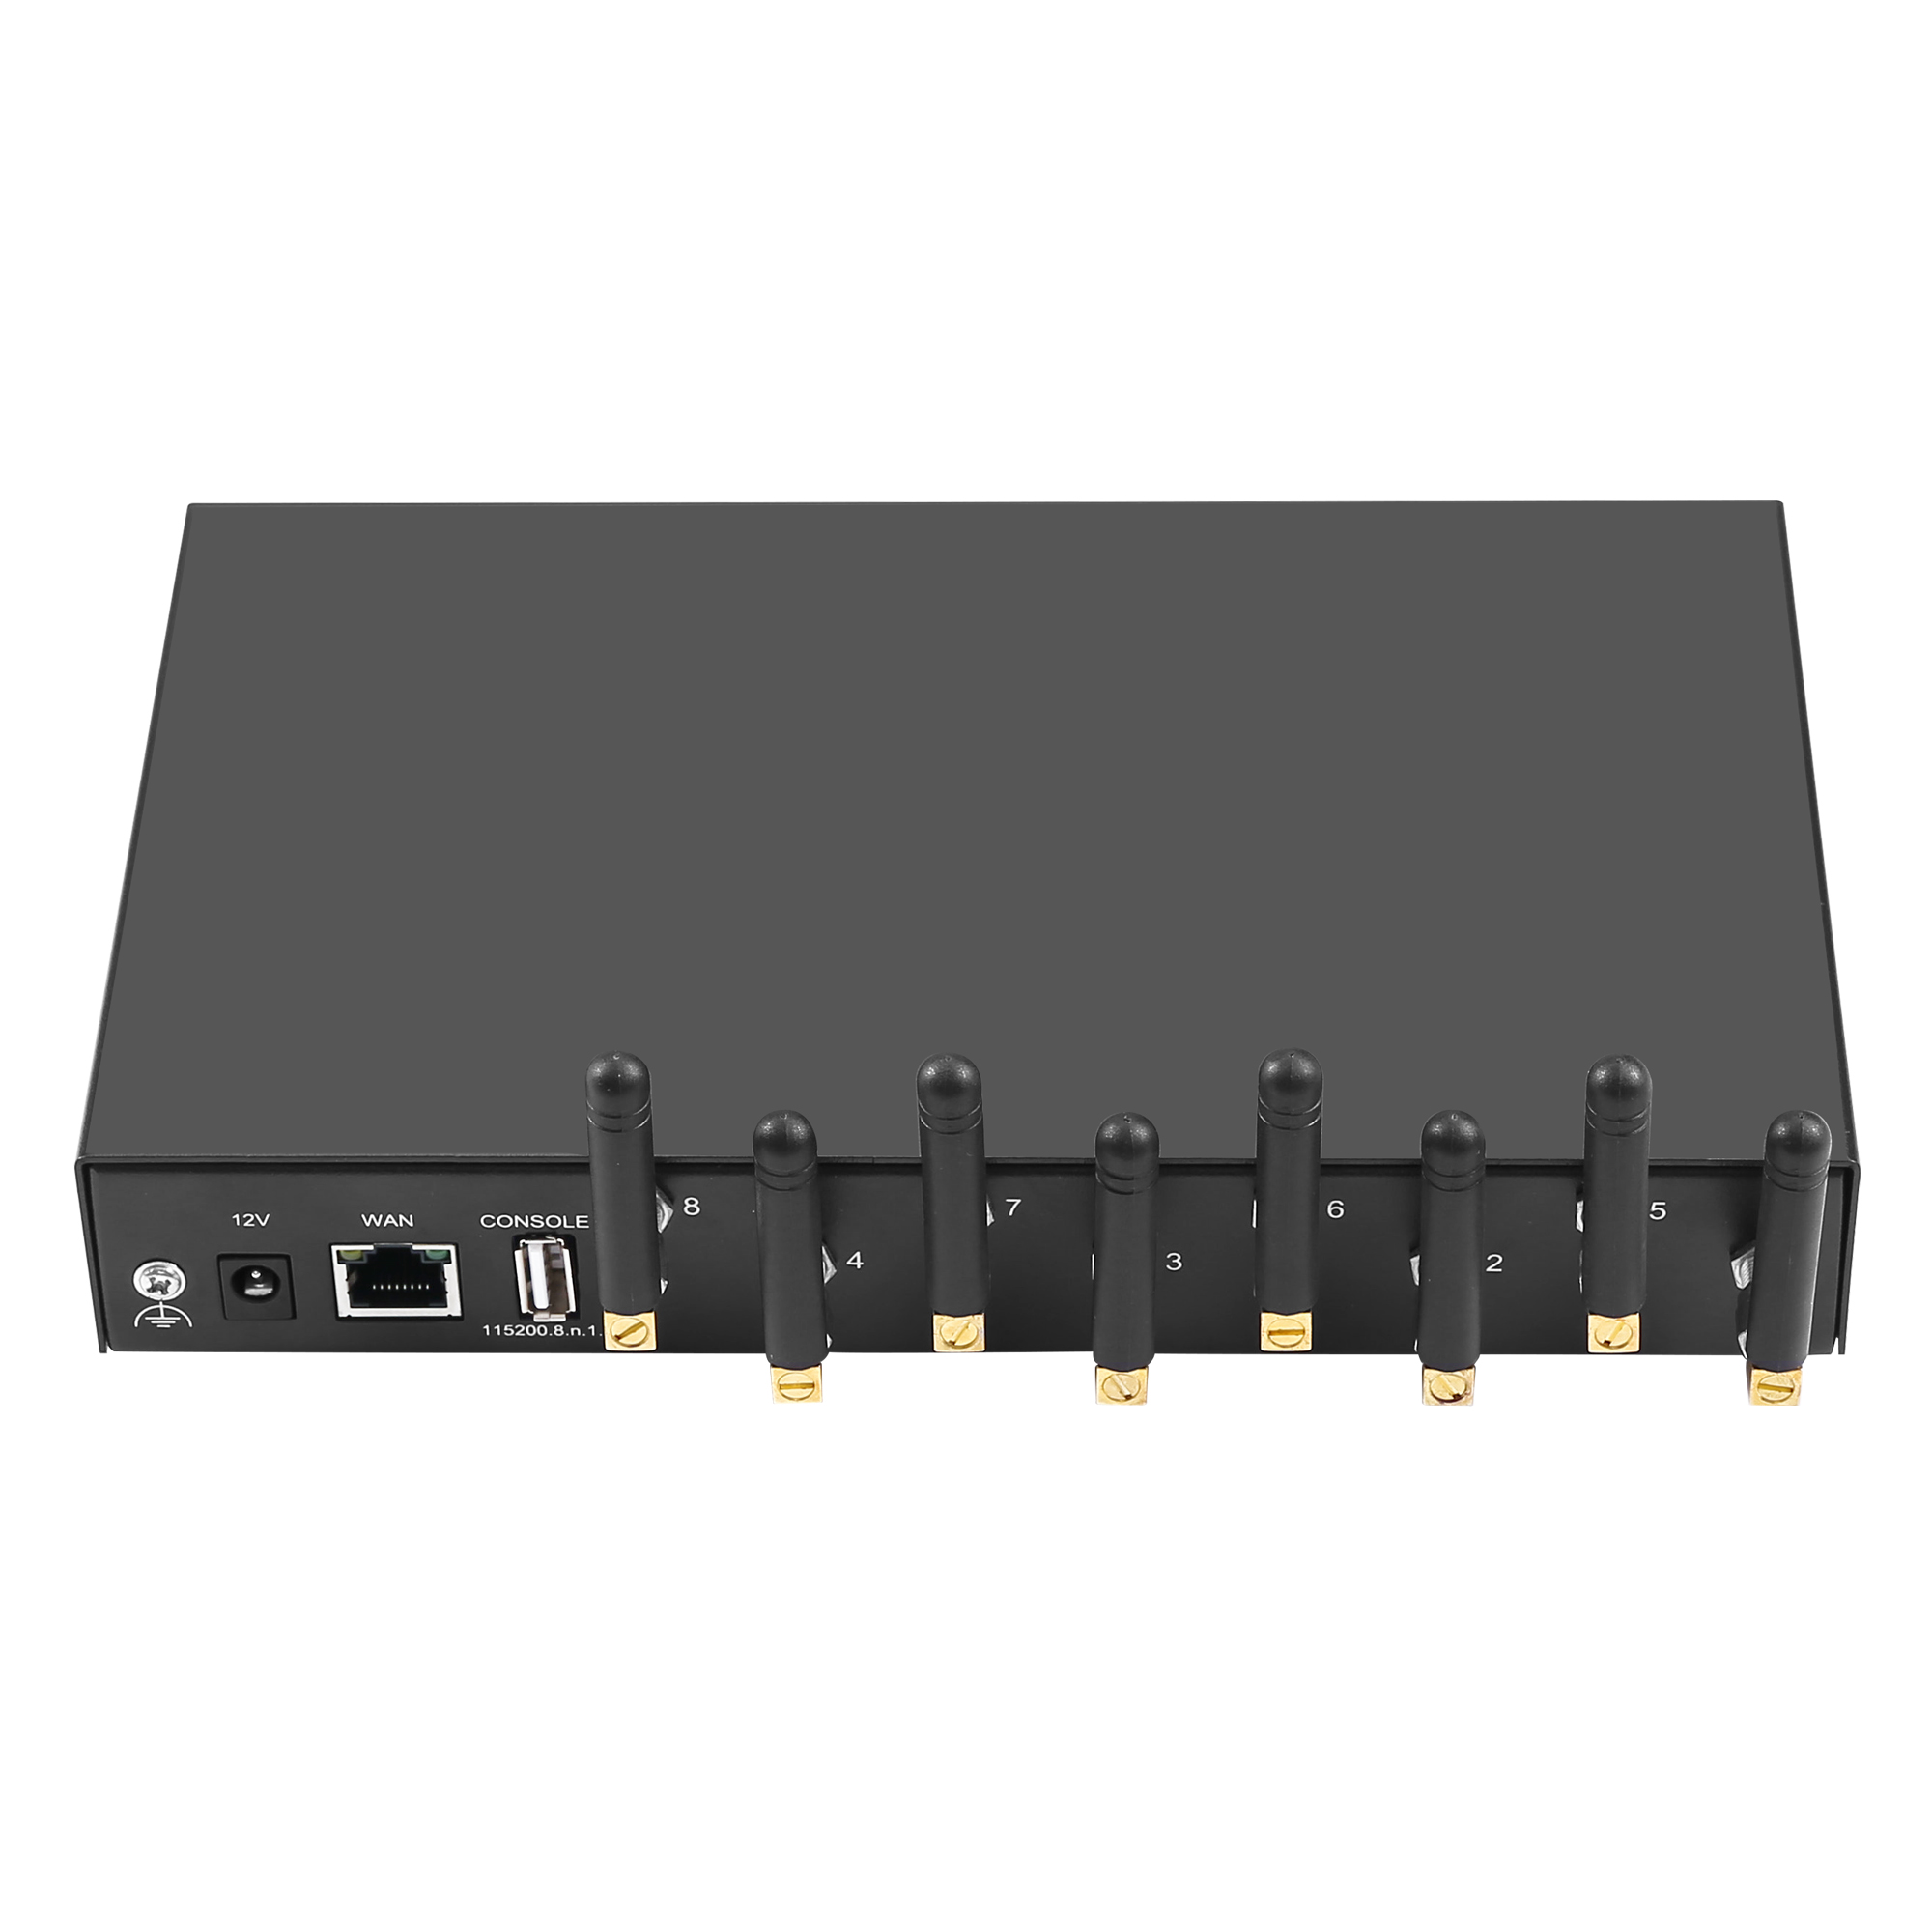 8 Ports GSM VOIP SK Gateway For Call Origination and Termination in GSM